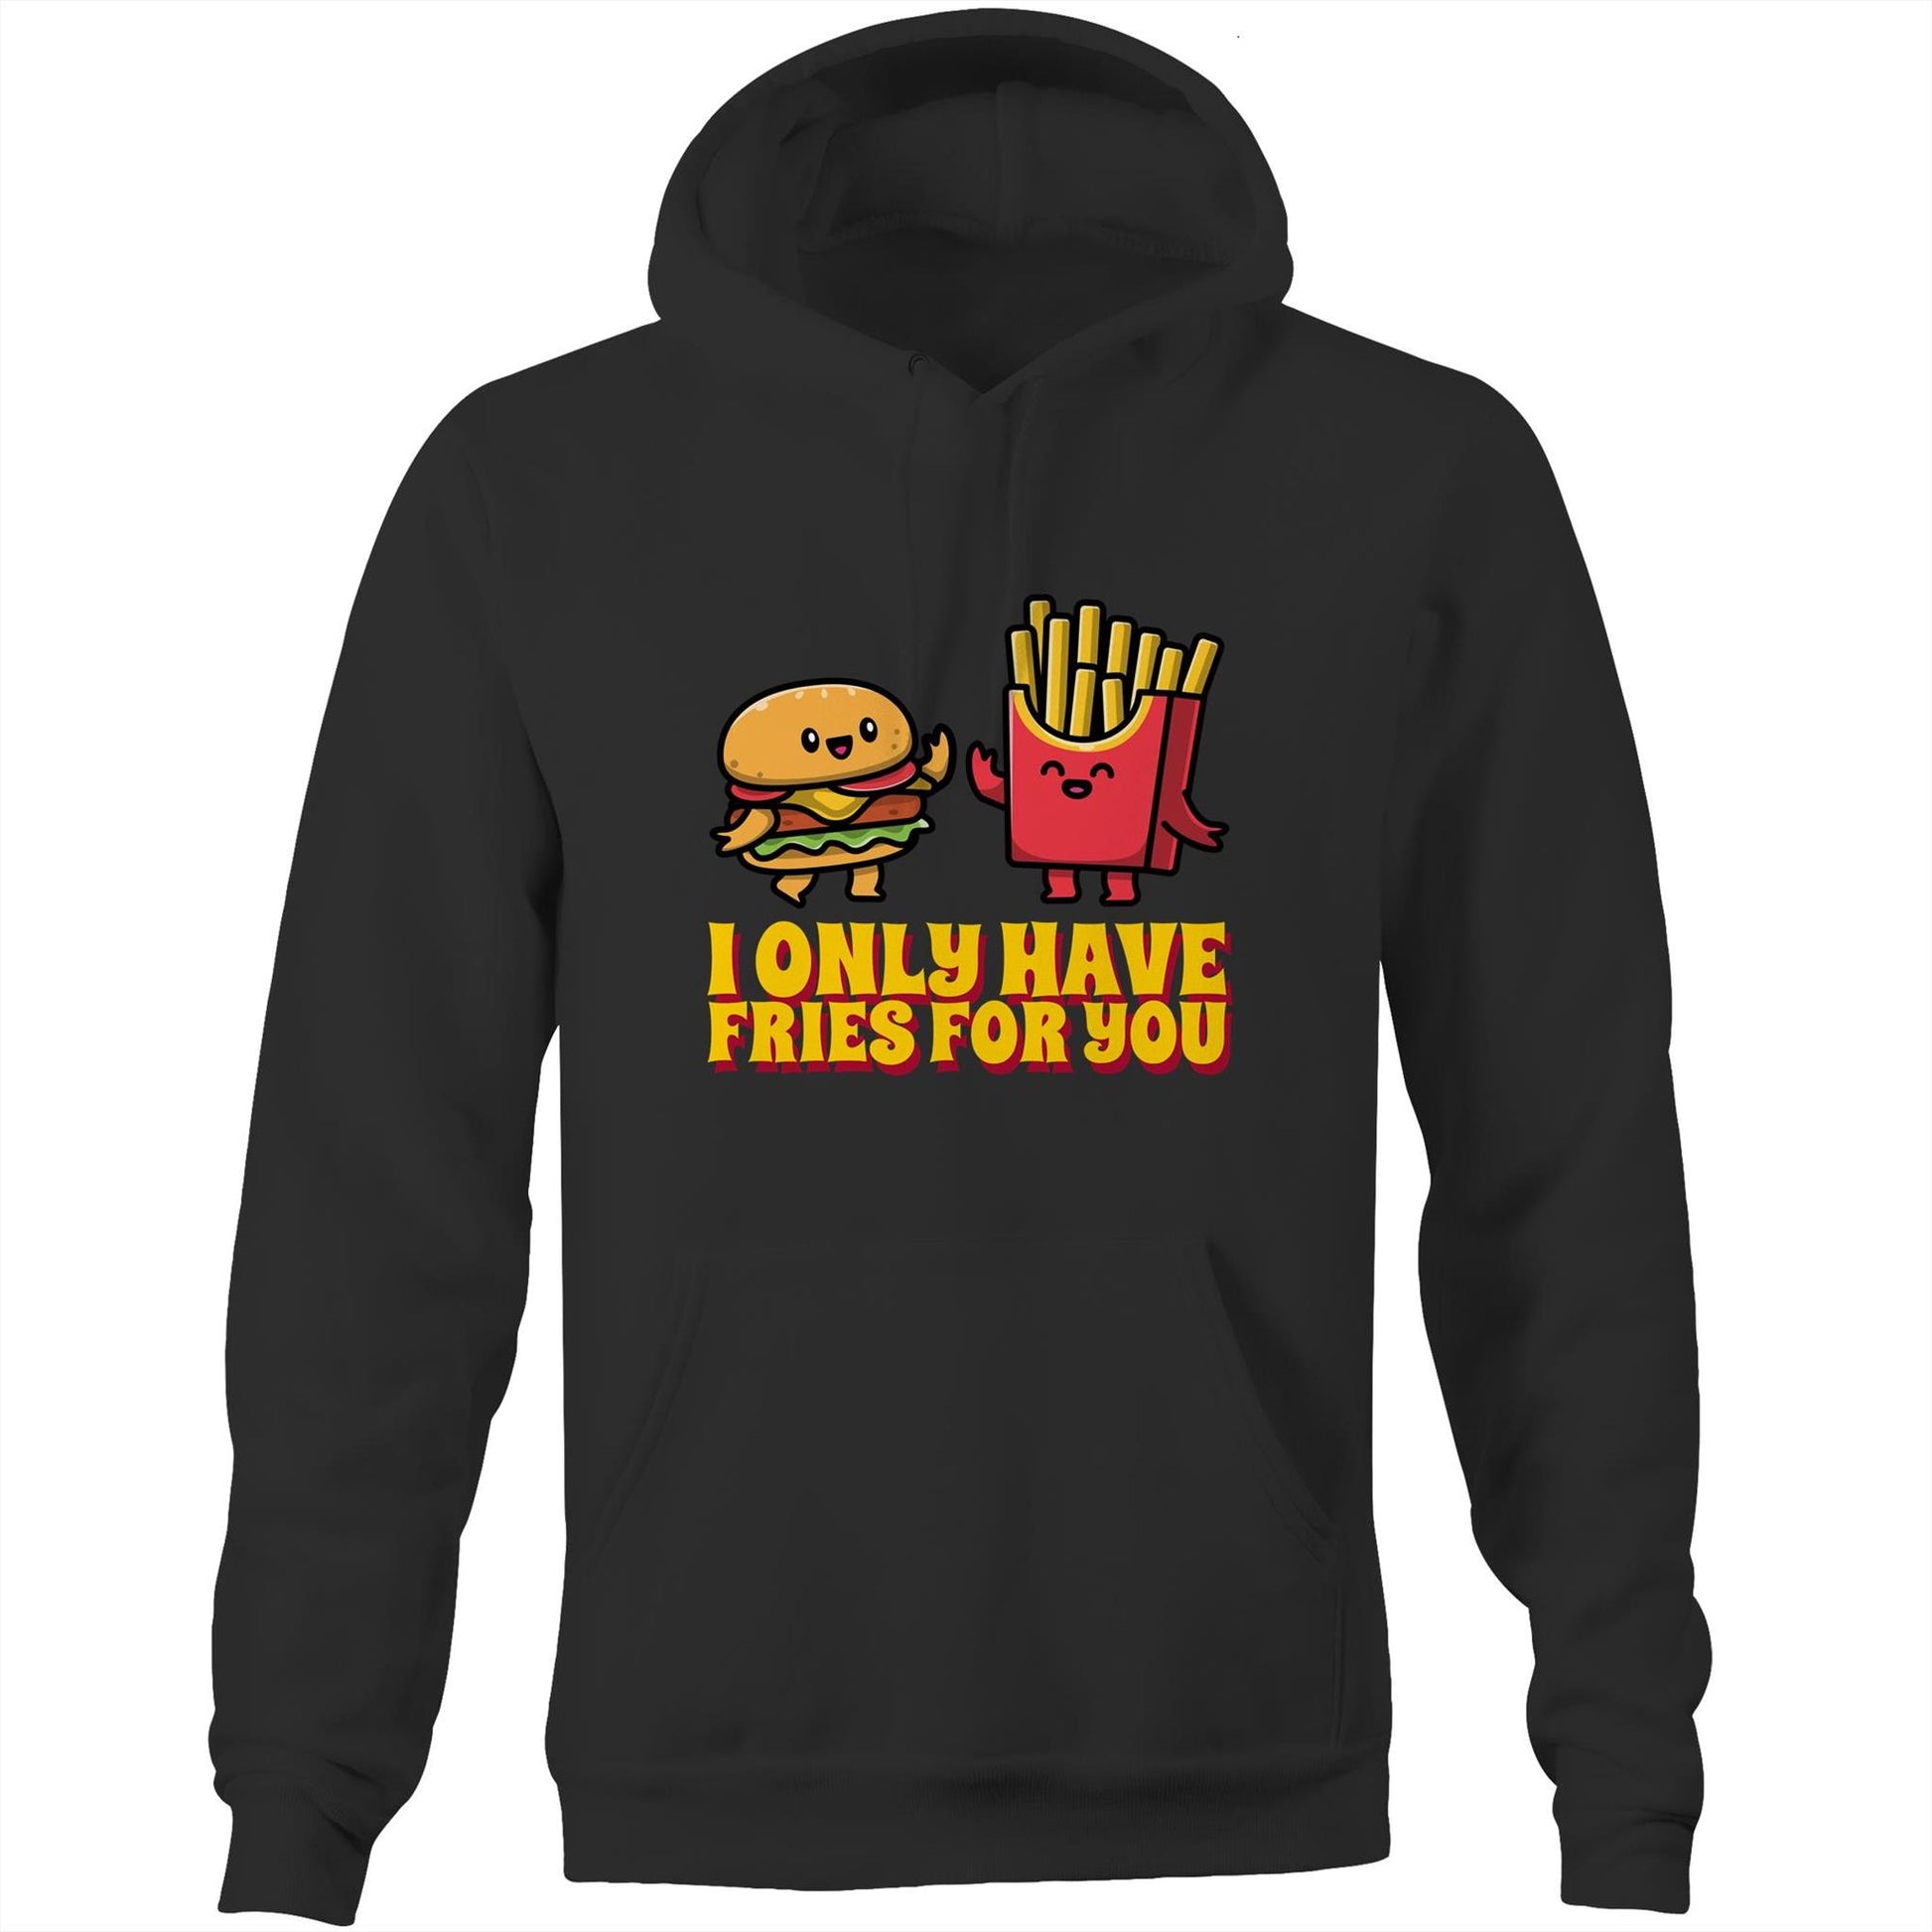 I Only Have Fries For You, Burger And Fries - Pocket Hoodie Sweatshirt Black Hoodie